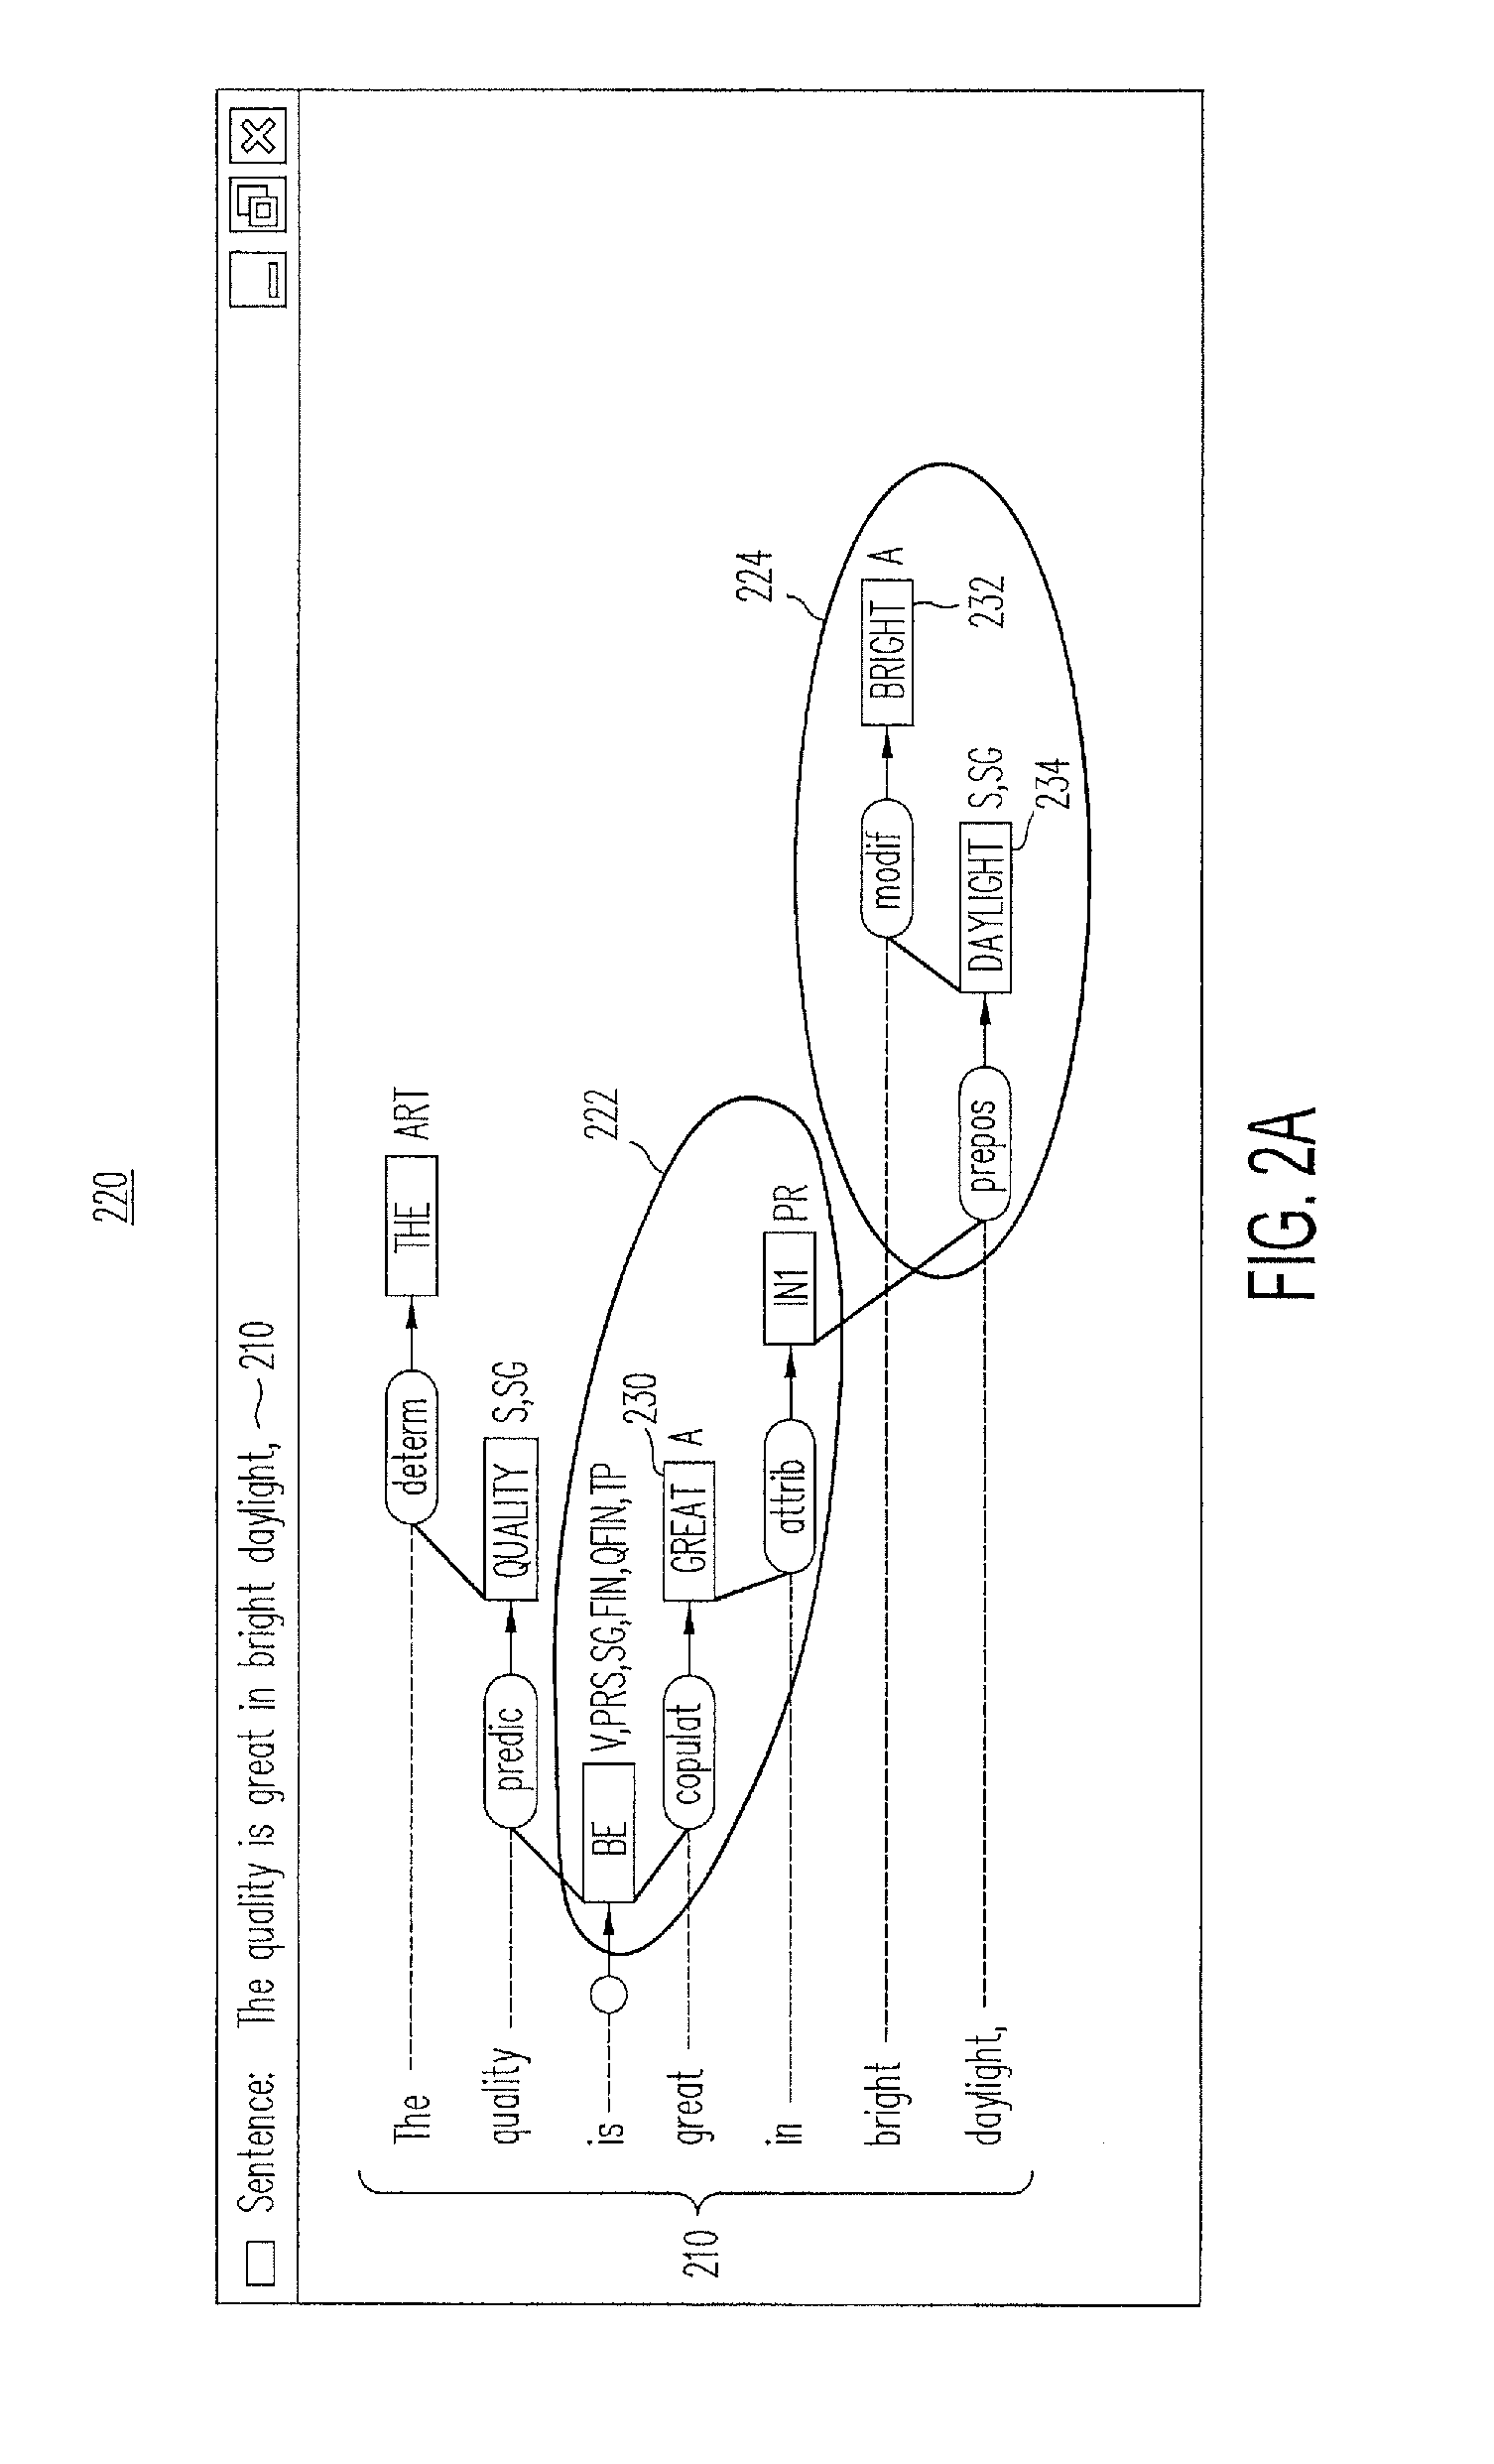 Content inversion for user searches and product recommendations systems and methods